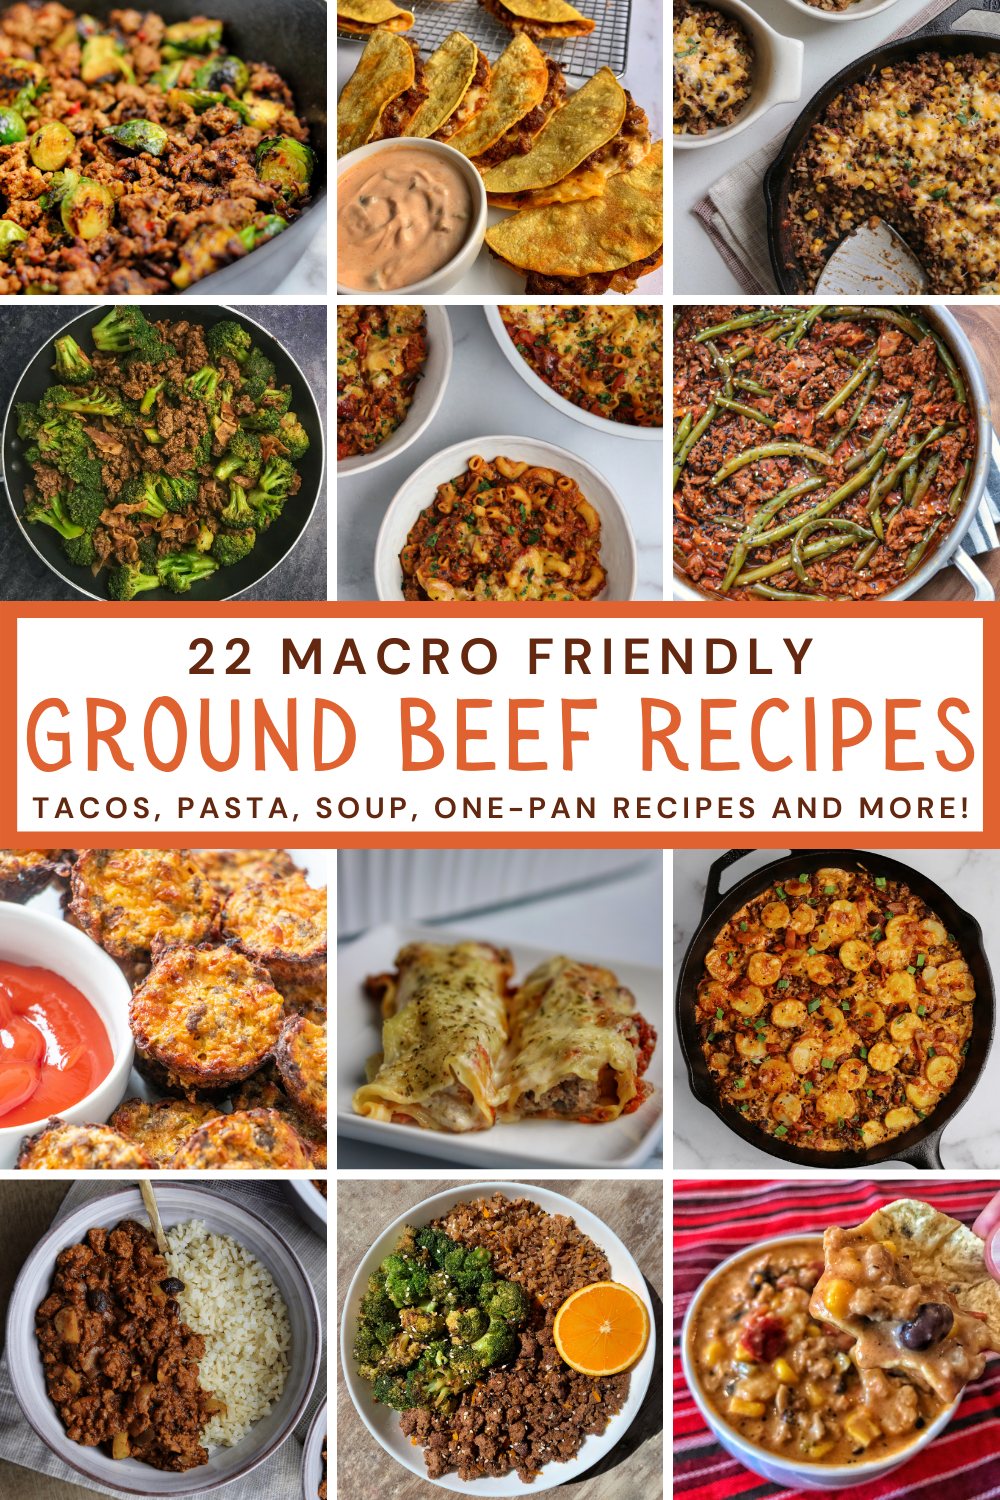 Low Calorie Recipes Made With Ground Beef